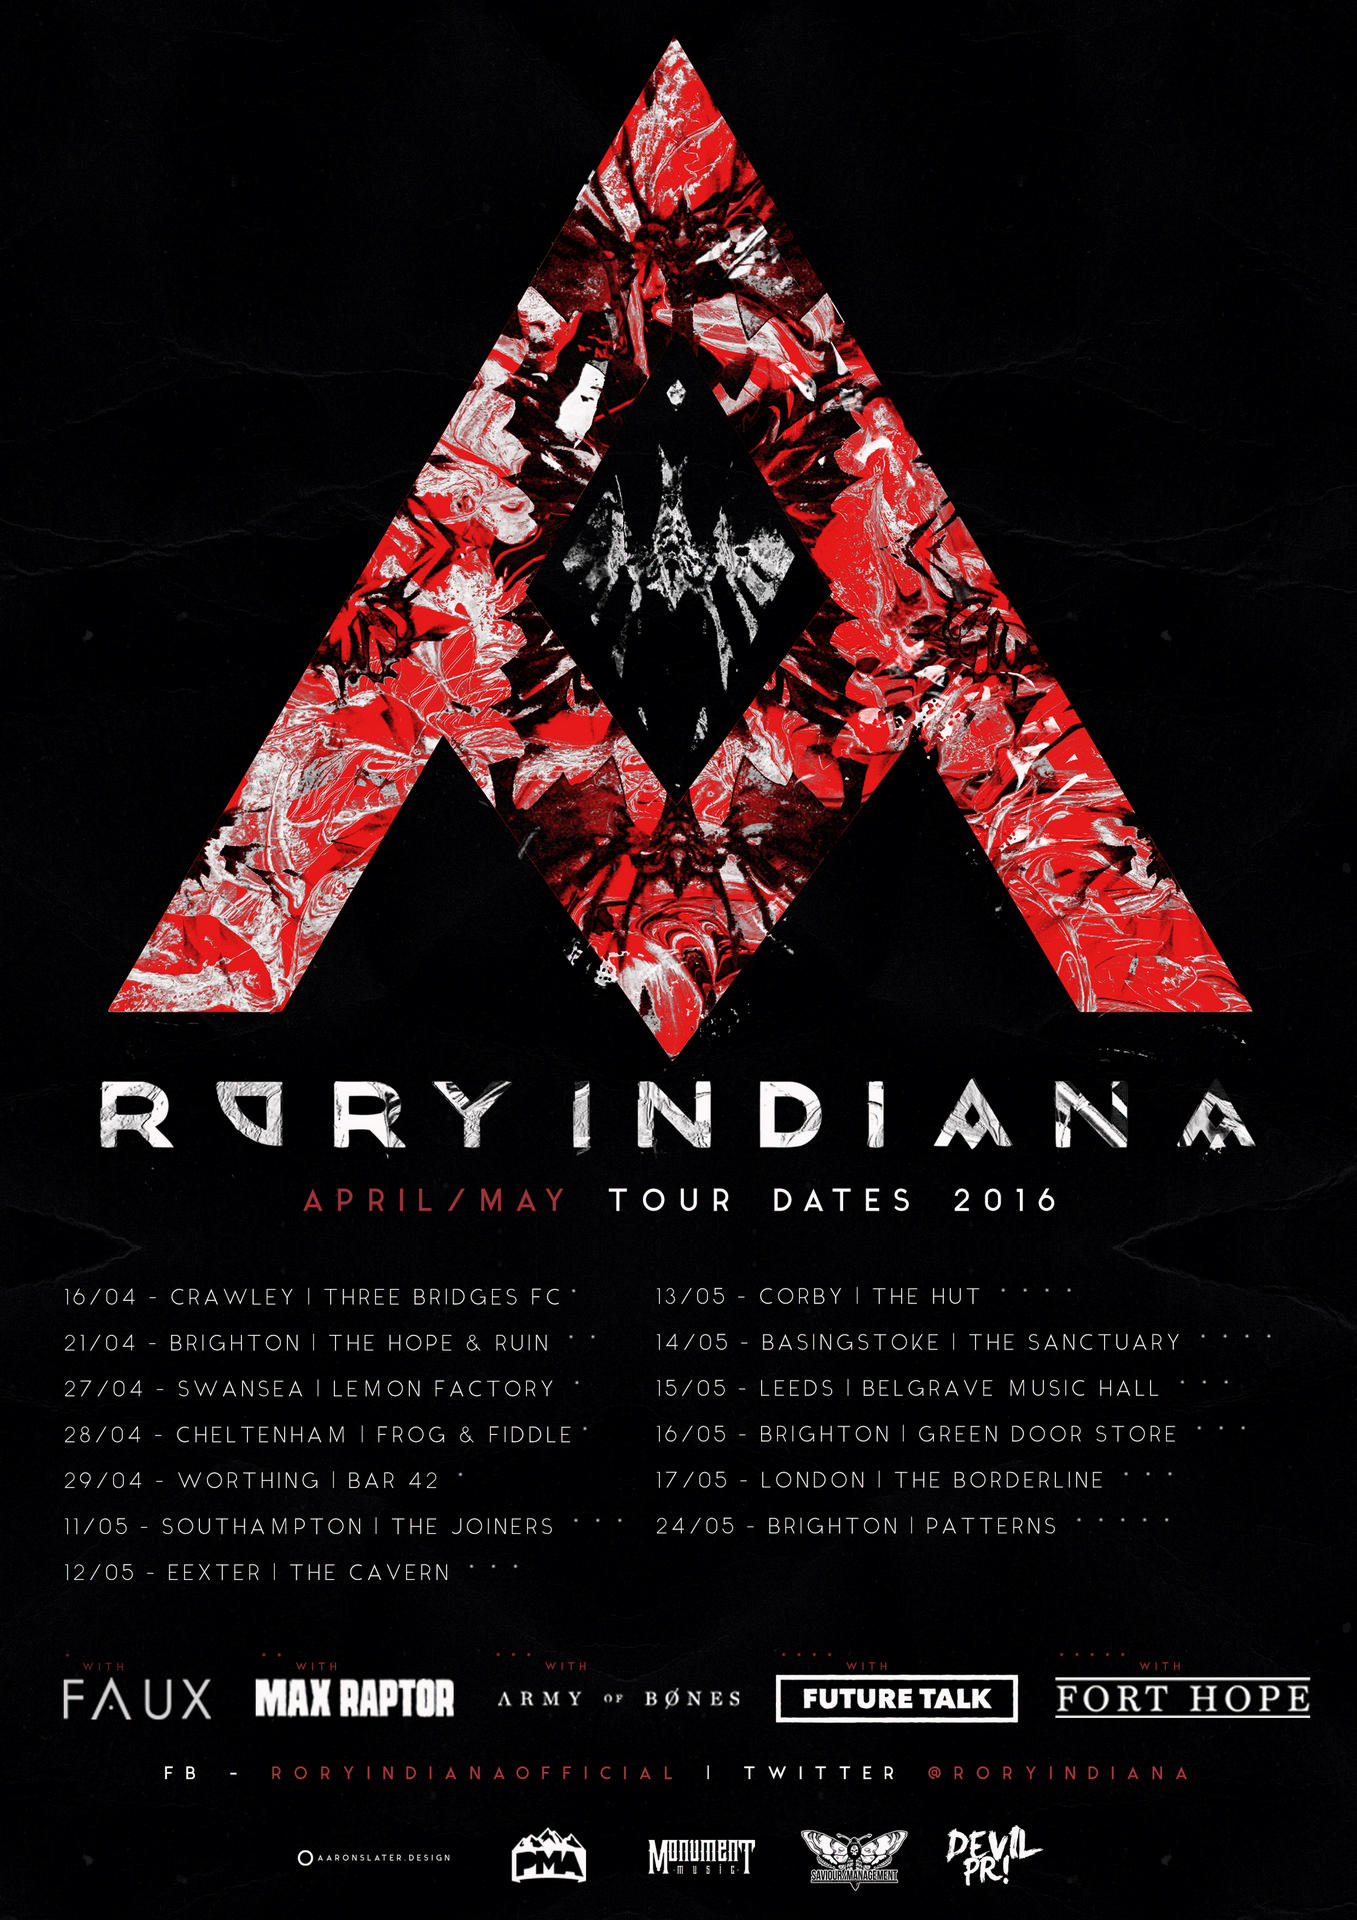 rory indiana april may 2016 tour poster